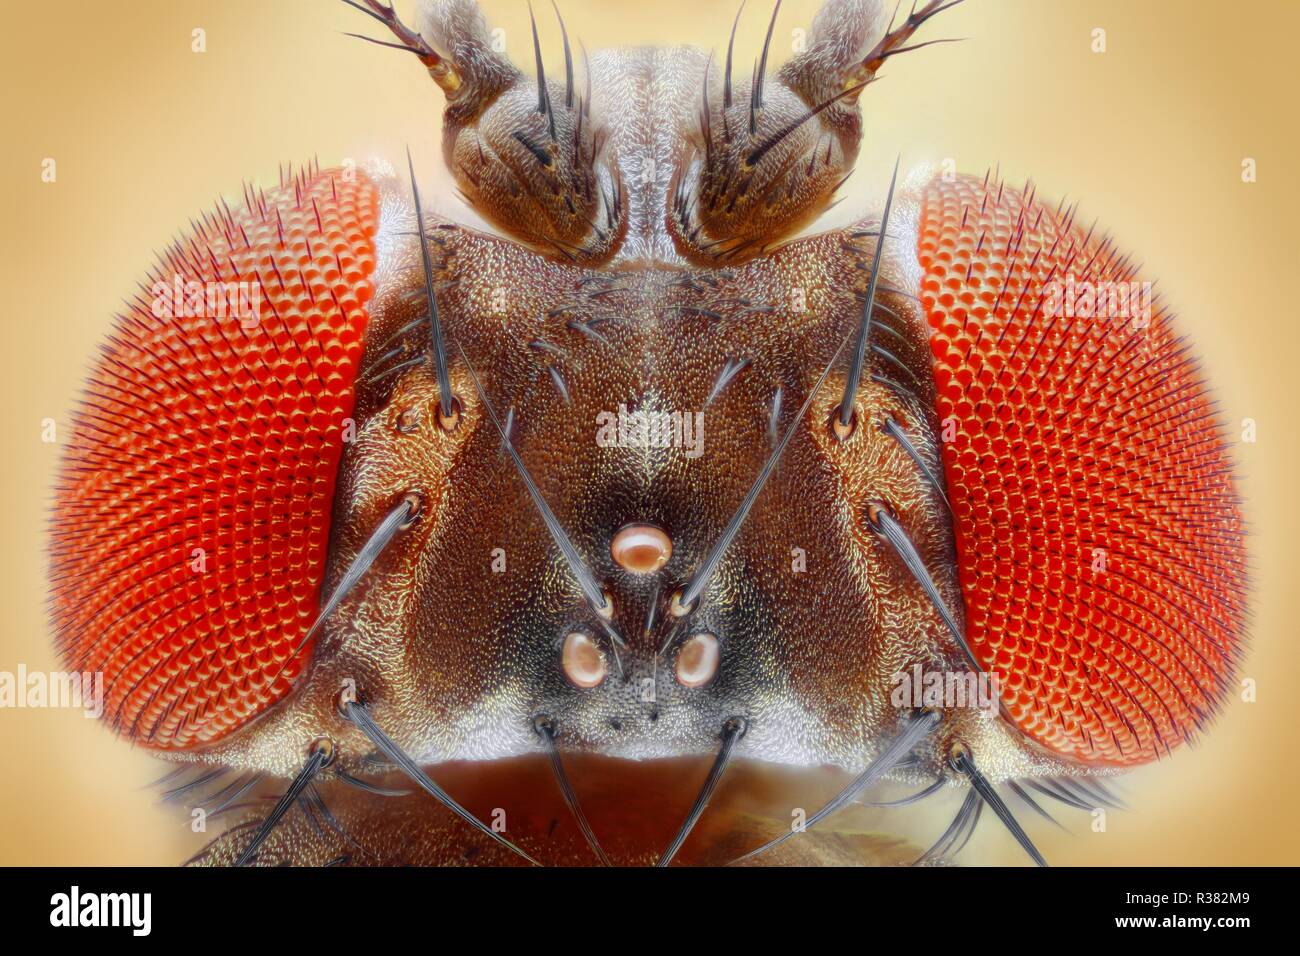 Extreme sharp and detailed image of the fruit fly head at an extreme magnification taken with a microscope objective. Stock Photo